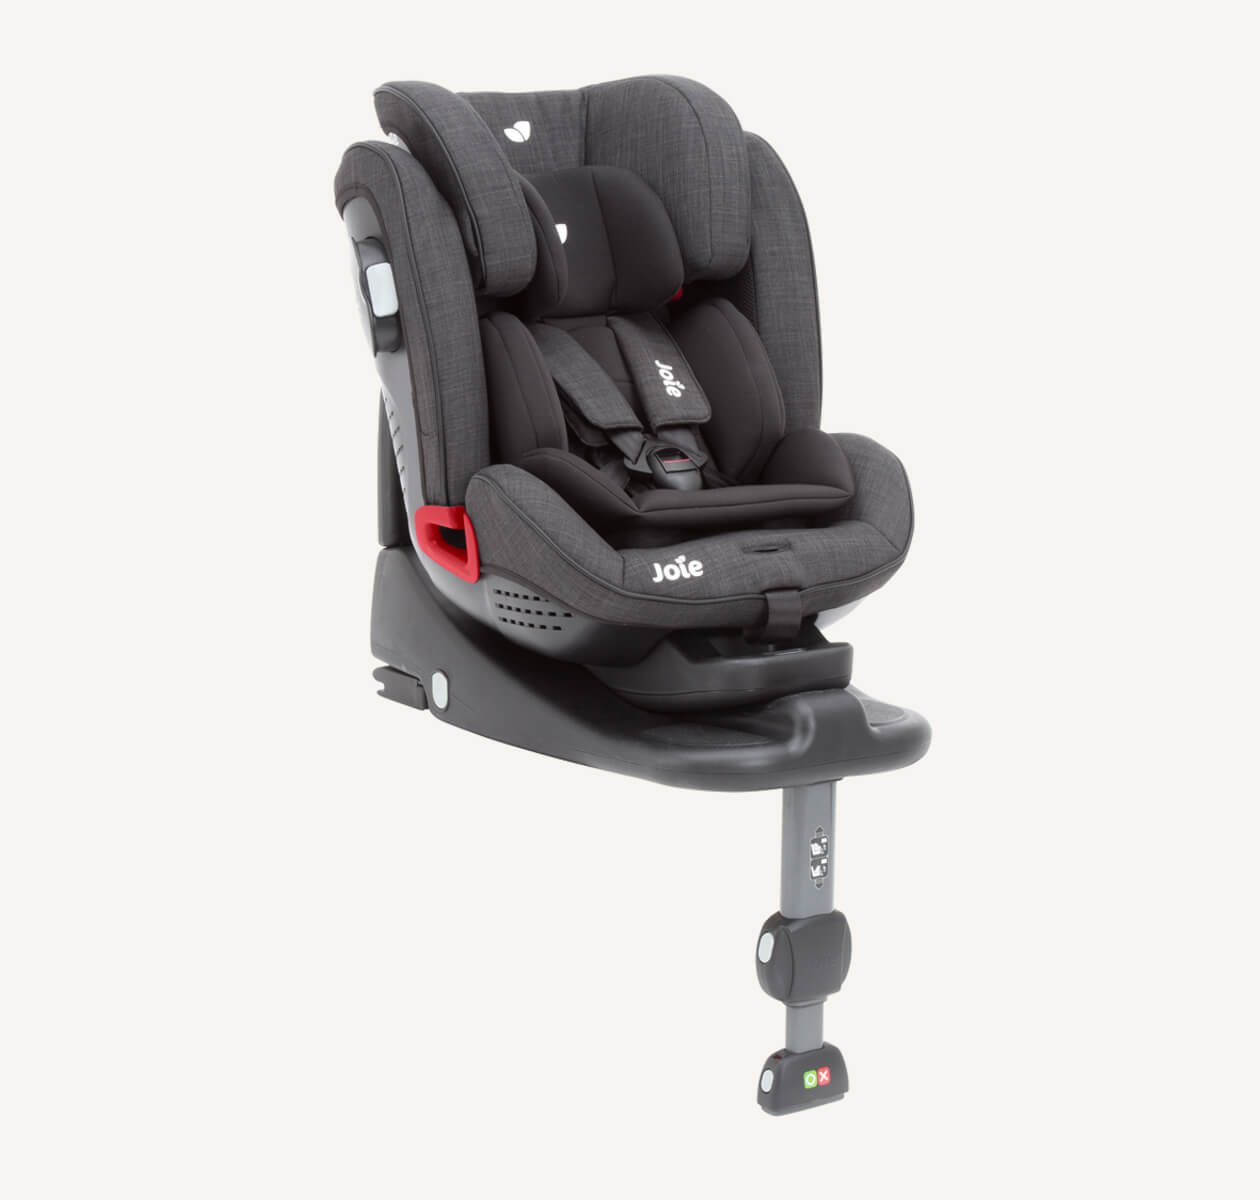  Joie stages car seat in gray and black at an angle.  